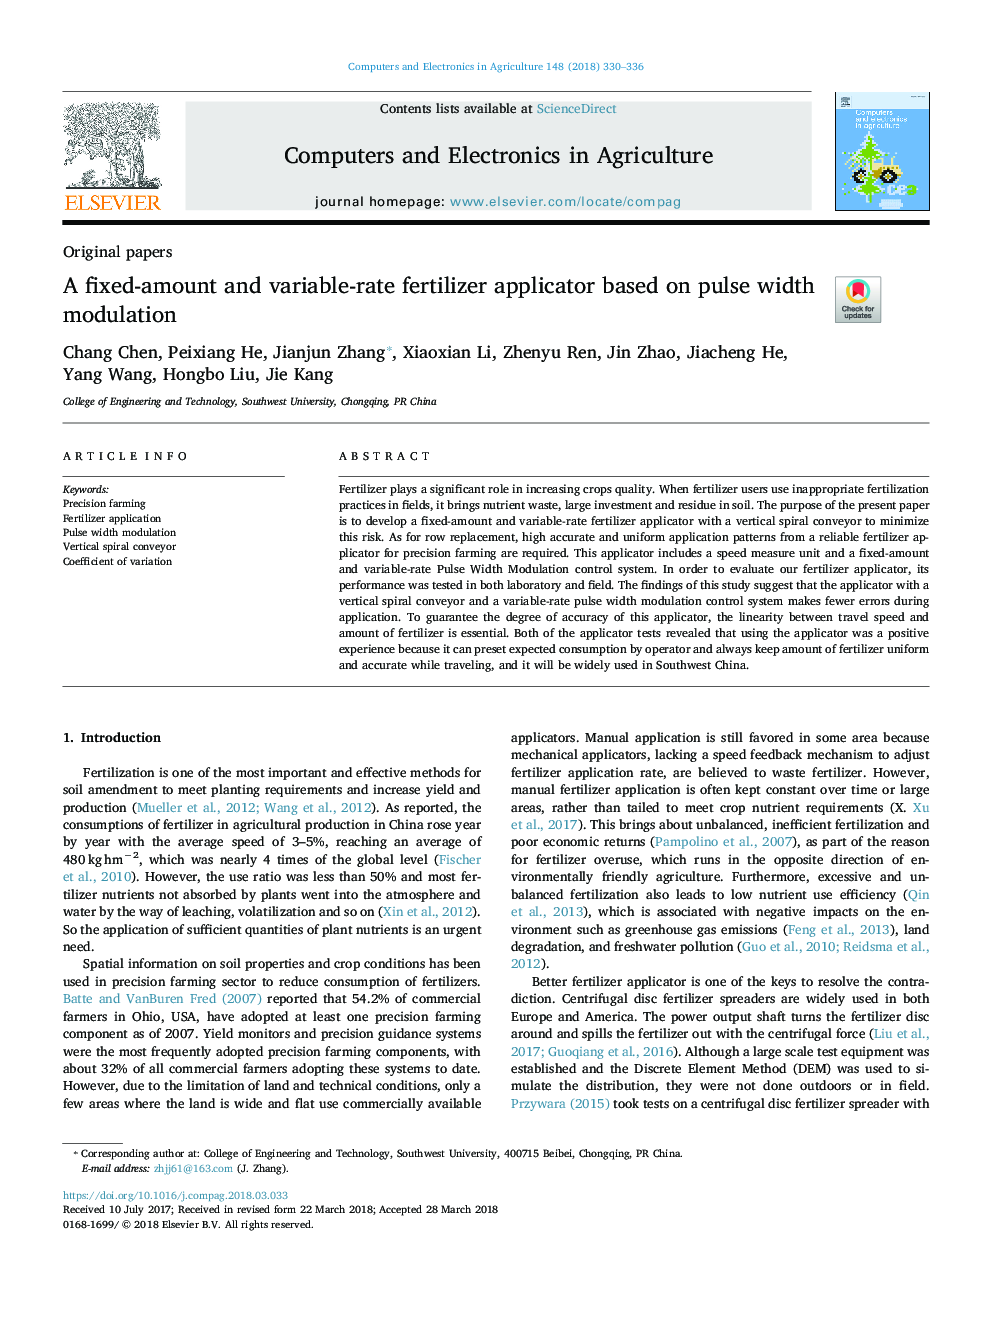 A fixed-amount and variable-rate fertilizer applicator based on pulse width modulation